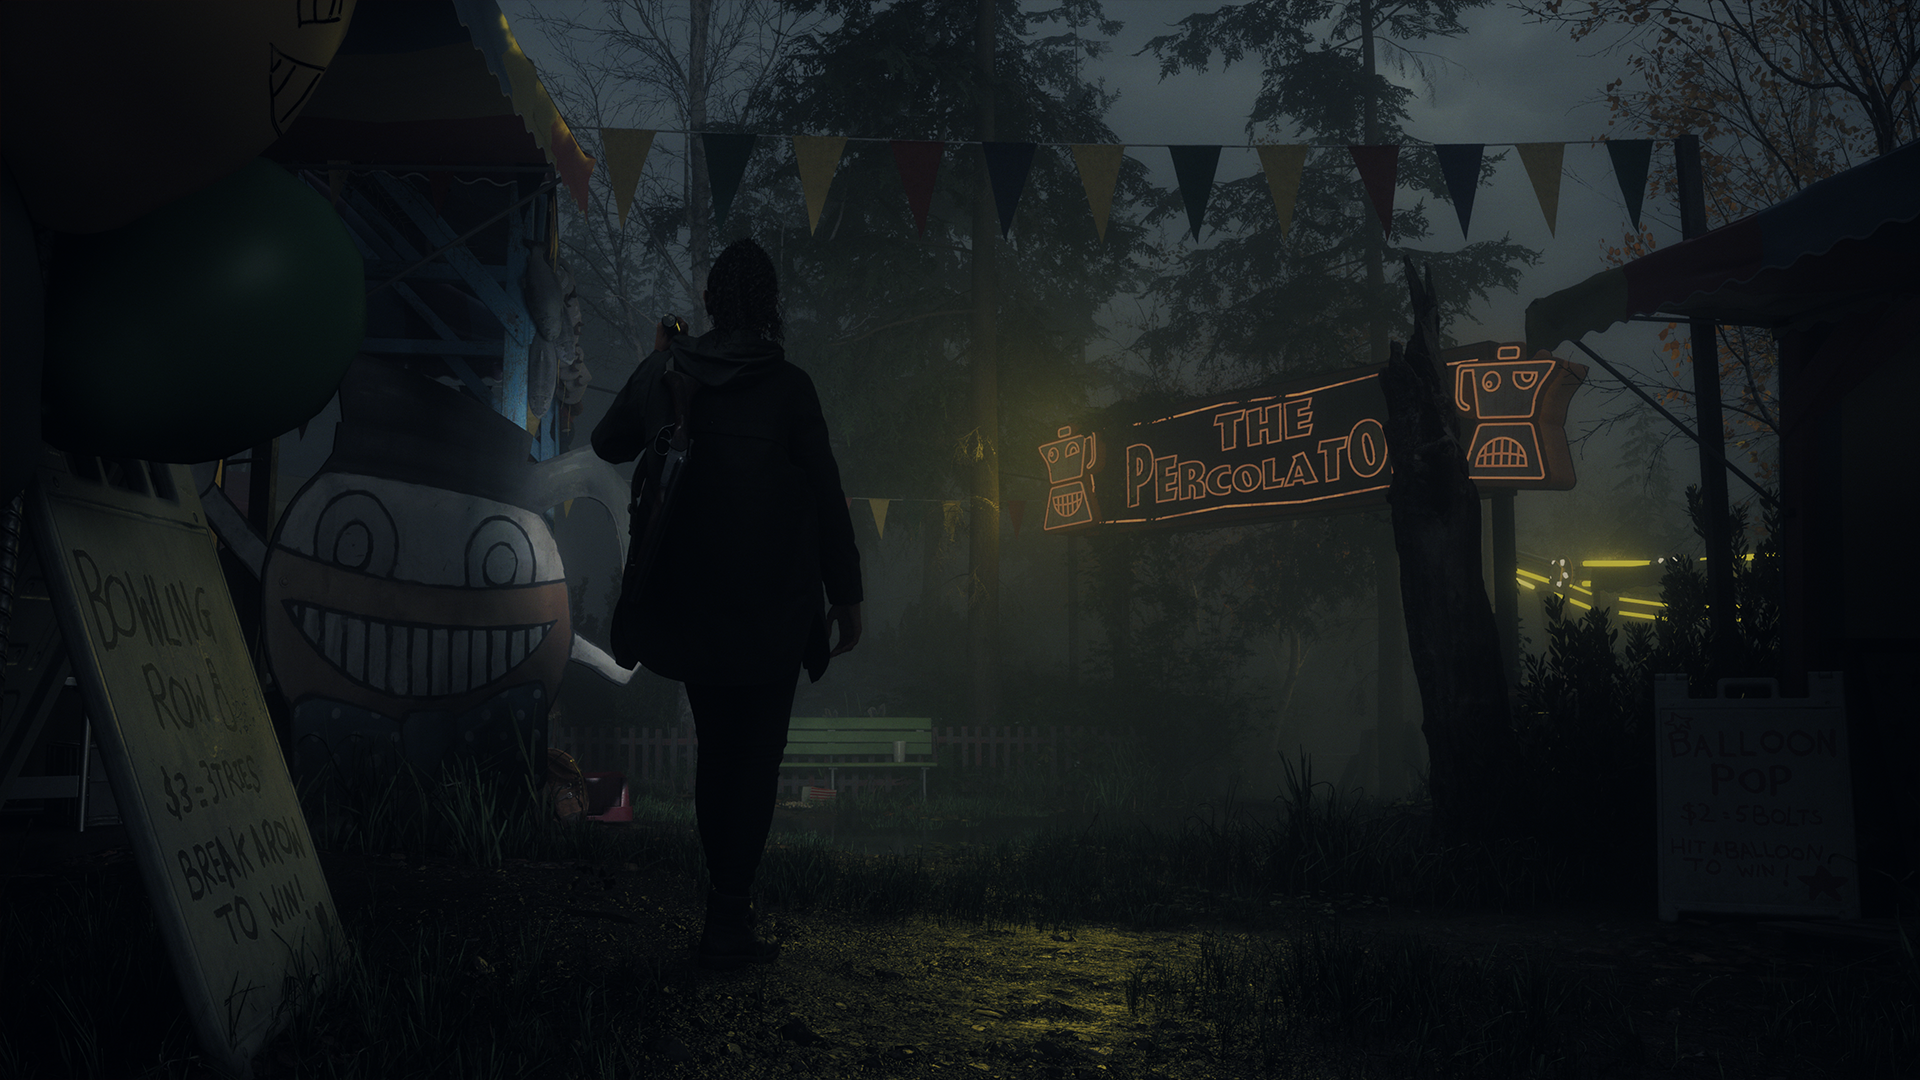 Alan Wake preview: a haunted man in an amazing game